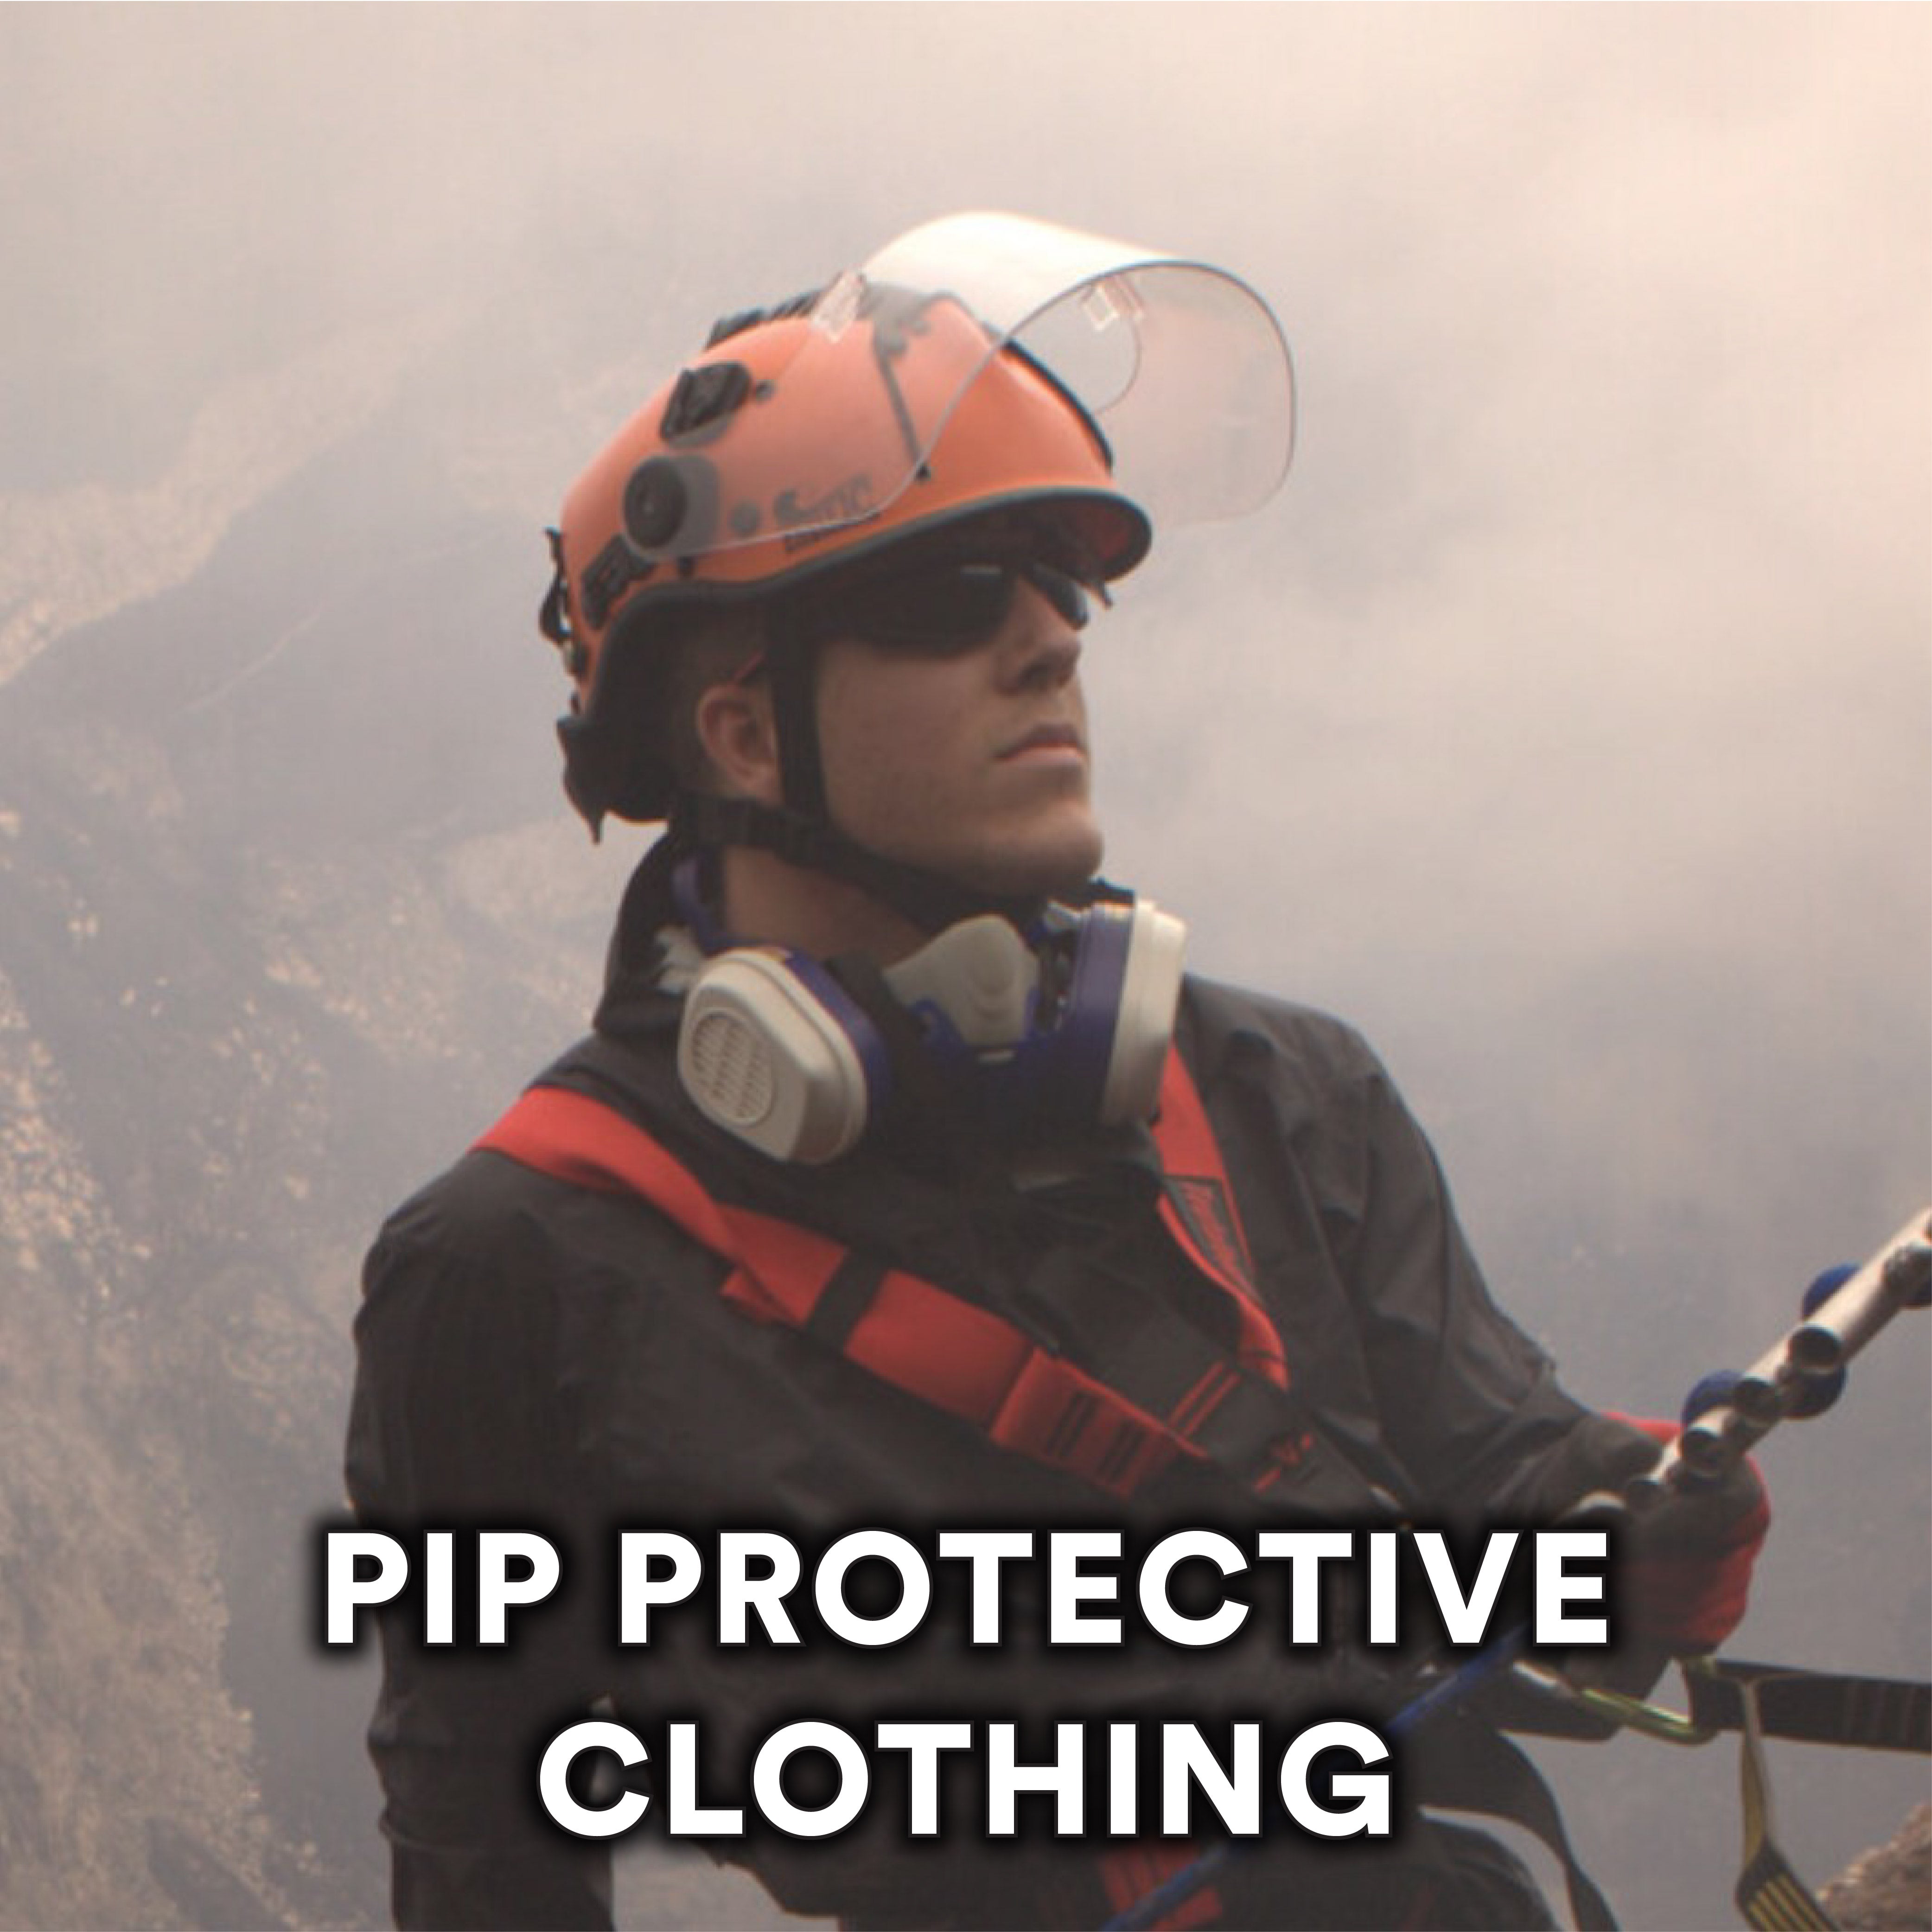 PIP Protective Clothing